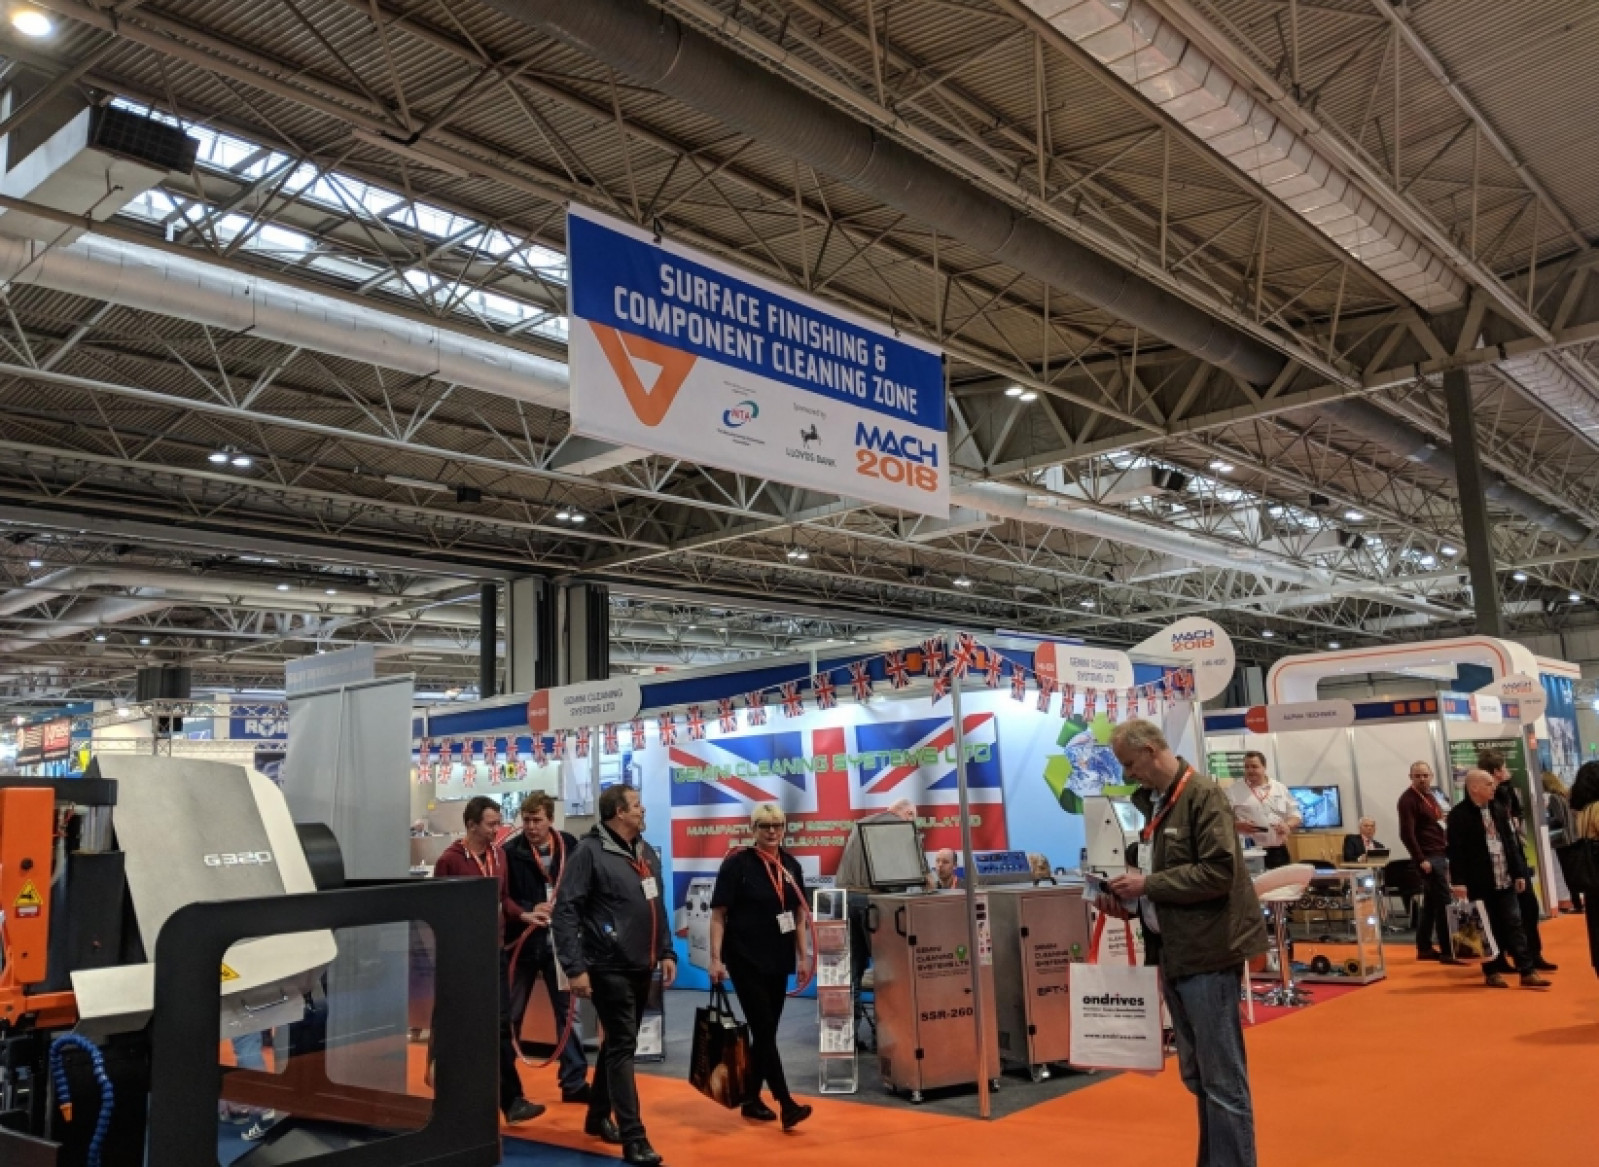 MIM members report strong interest from MACH 2018